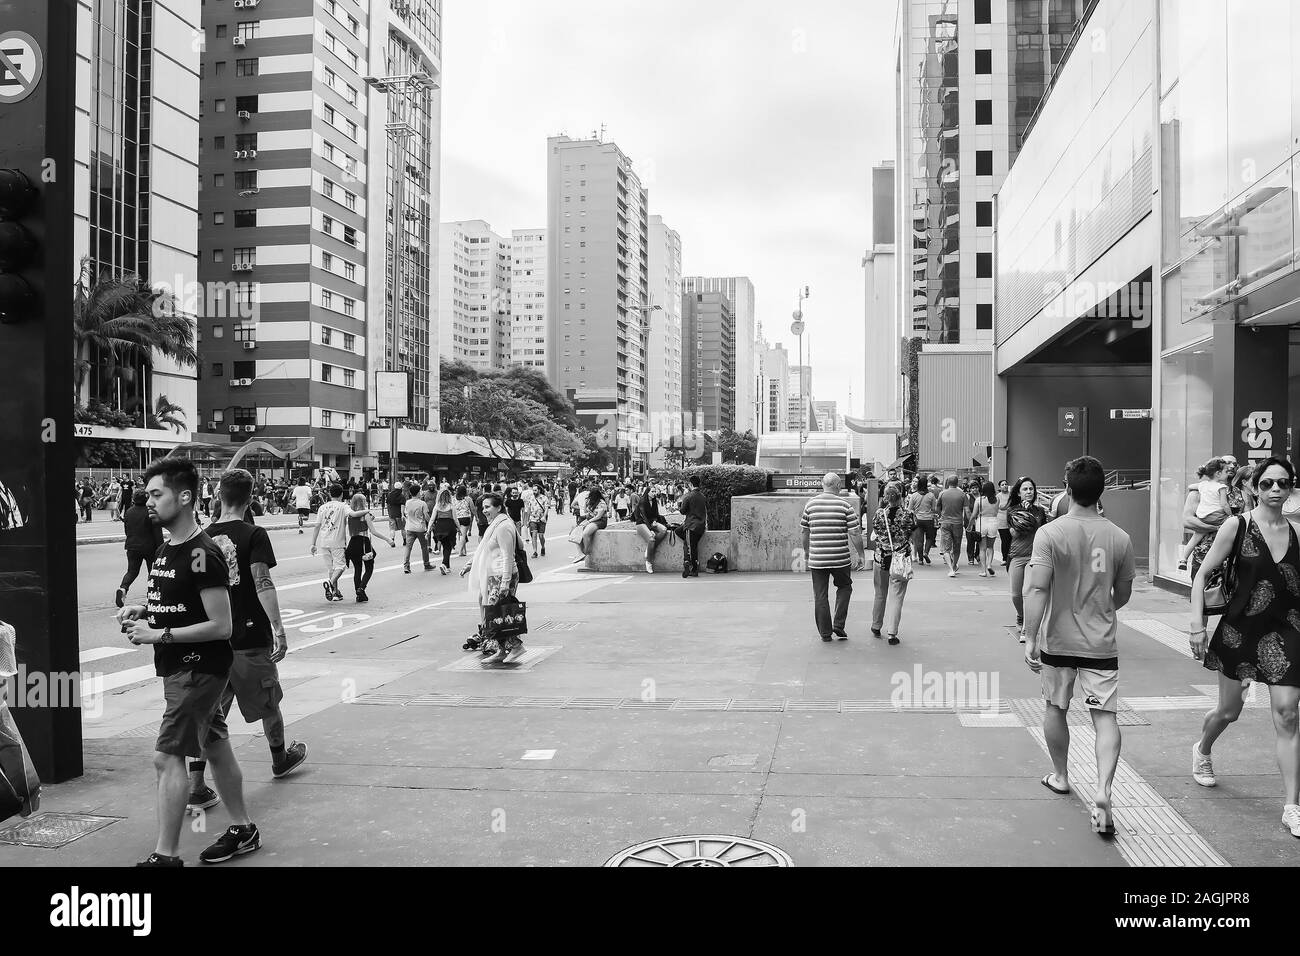 Sao Paulo - SP, Brazil - November 17, 2019: Paulista avenue open on sunday for the traffic of people. Avenue free for pedestrians, exercises and leisu Stock Photo